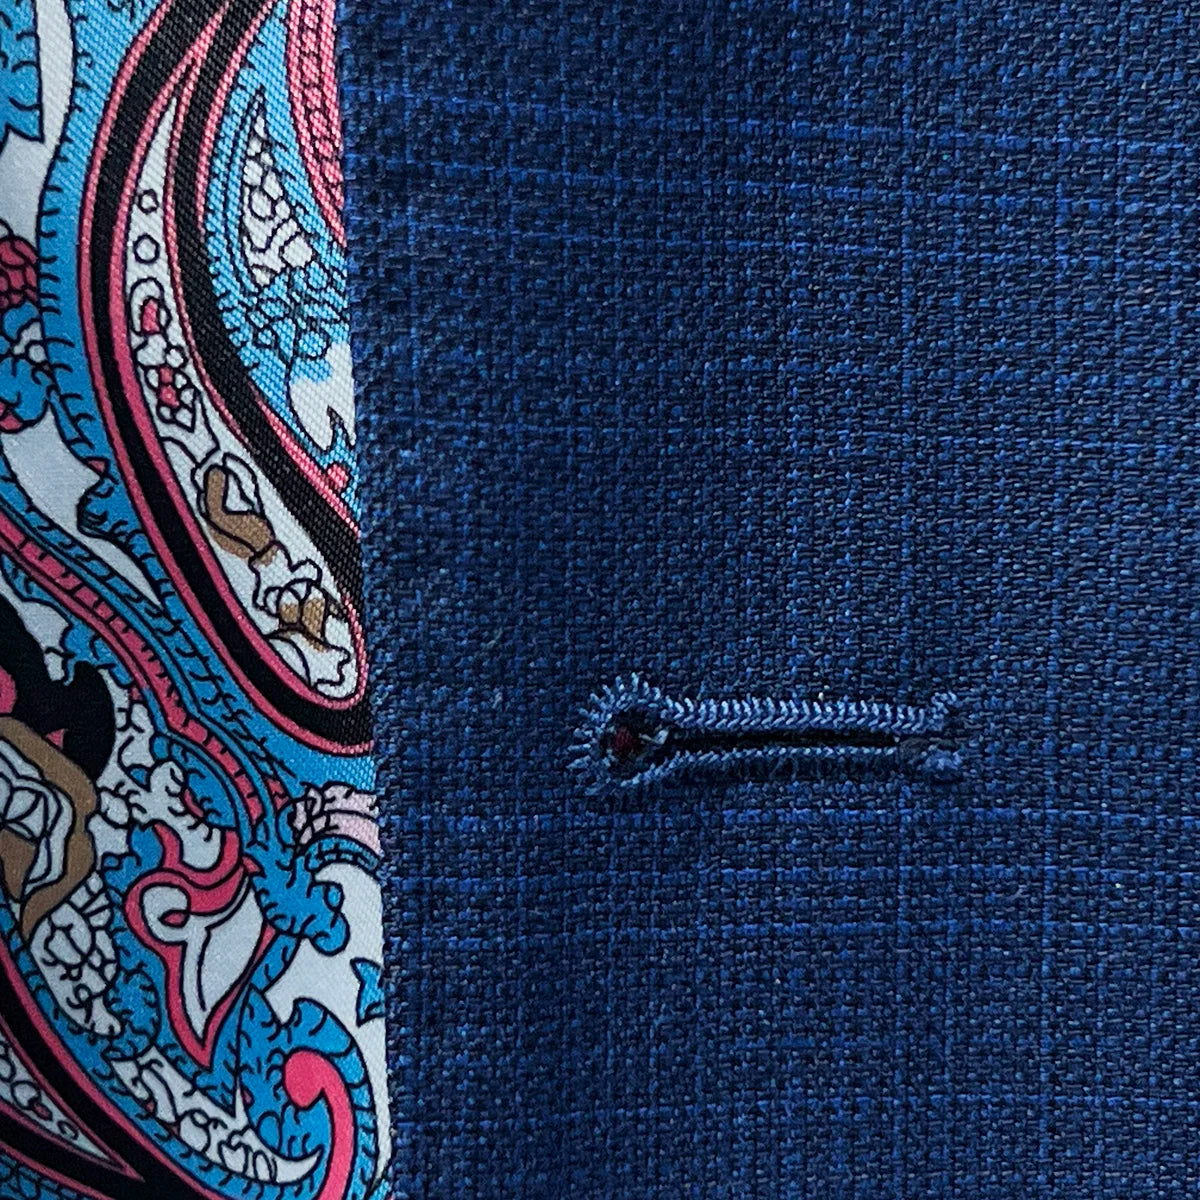 Detailed view of the buttonhole stitching on the royal blue suit.